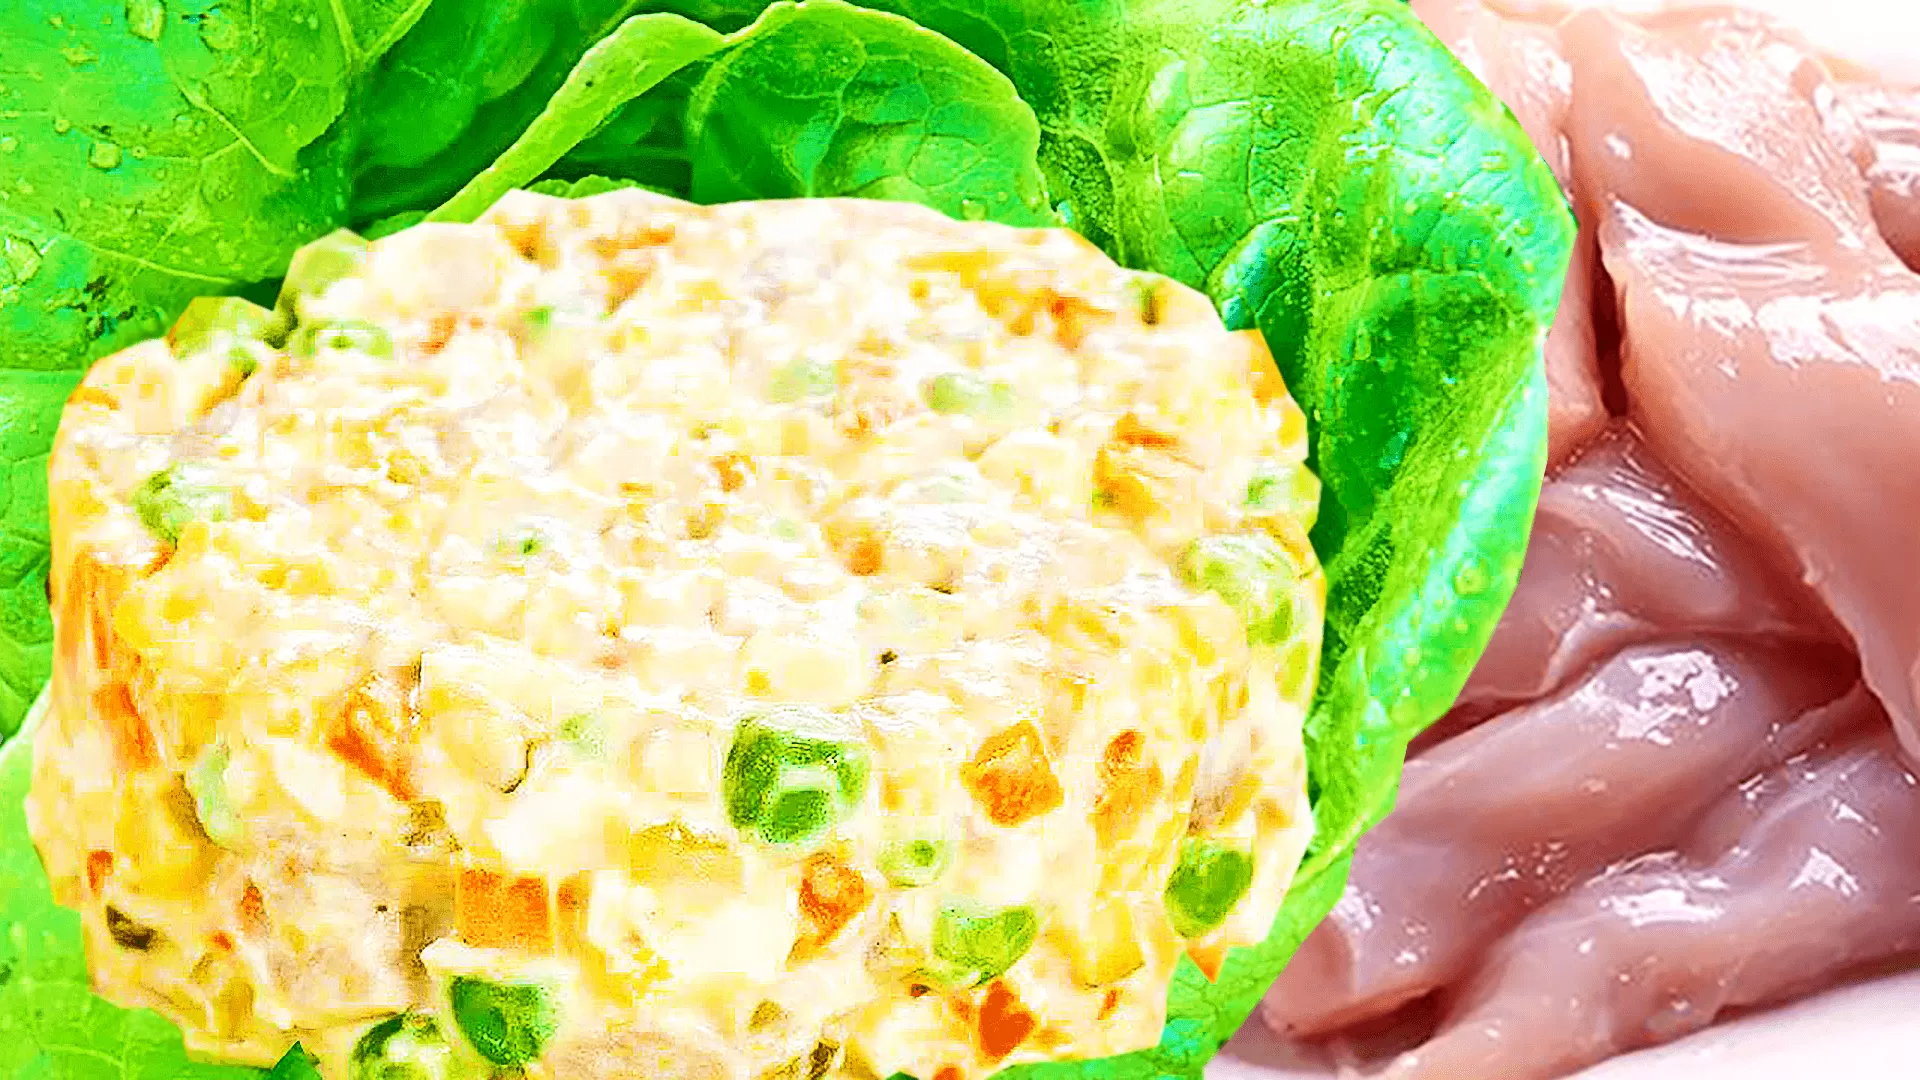 Homemade Chicken Salad Recipe with Mayonnaise and Vegetables